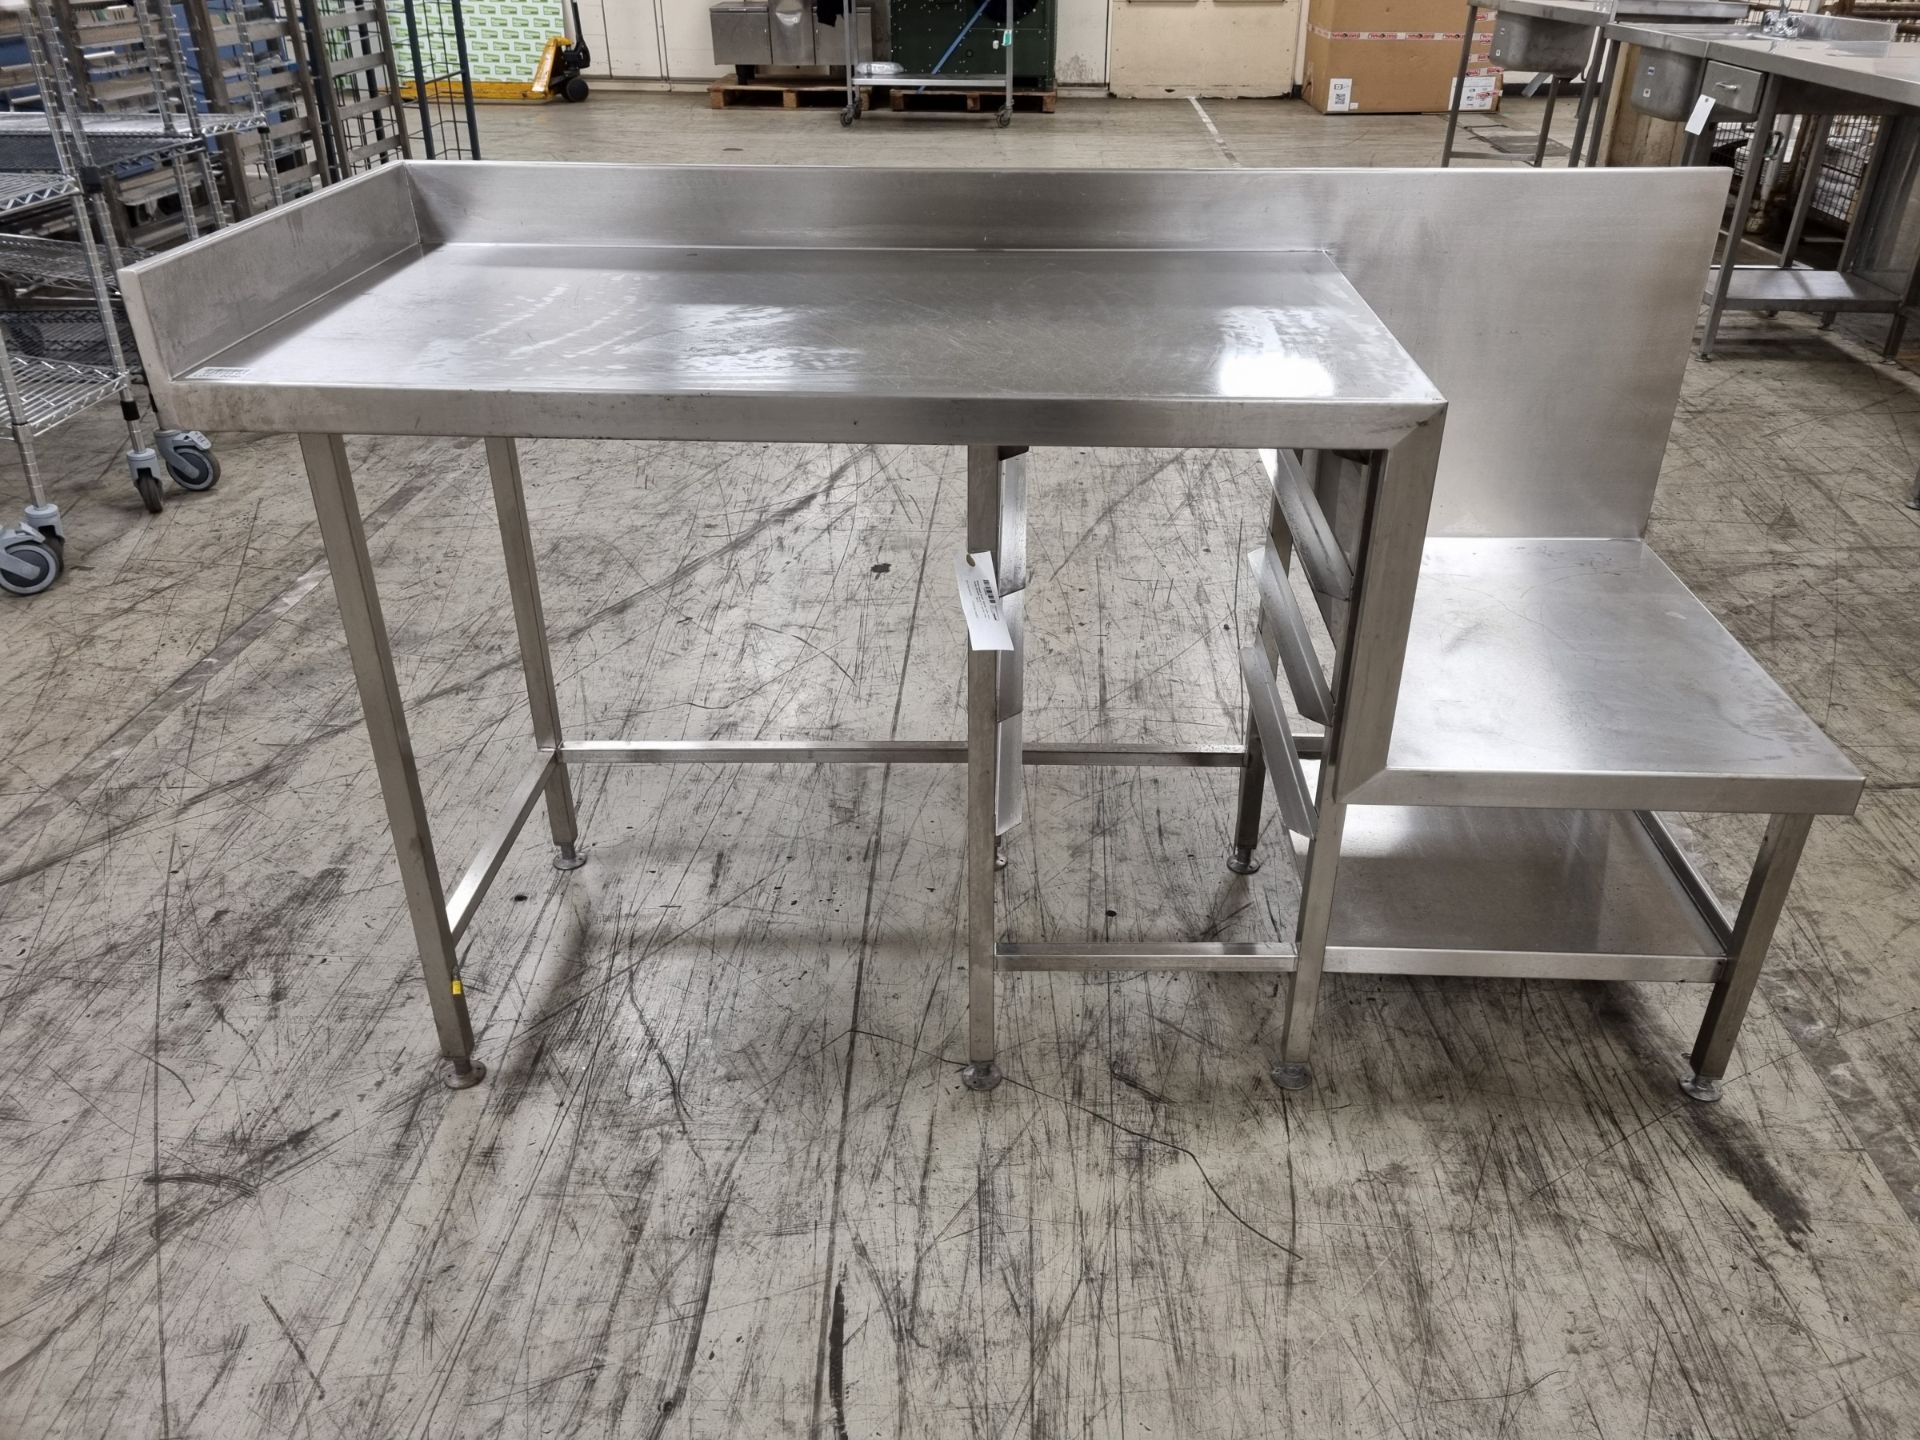 Stainless steel table with two side shelfs built in plus tray rack